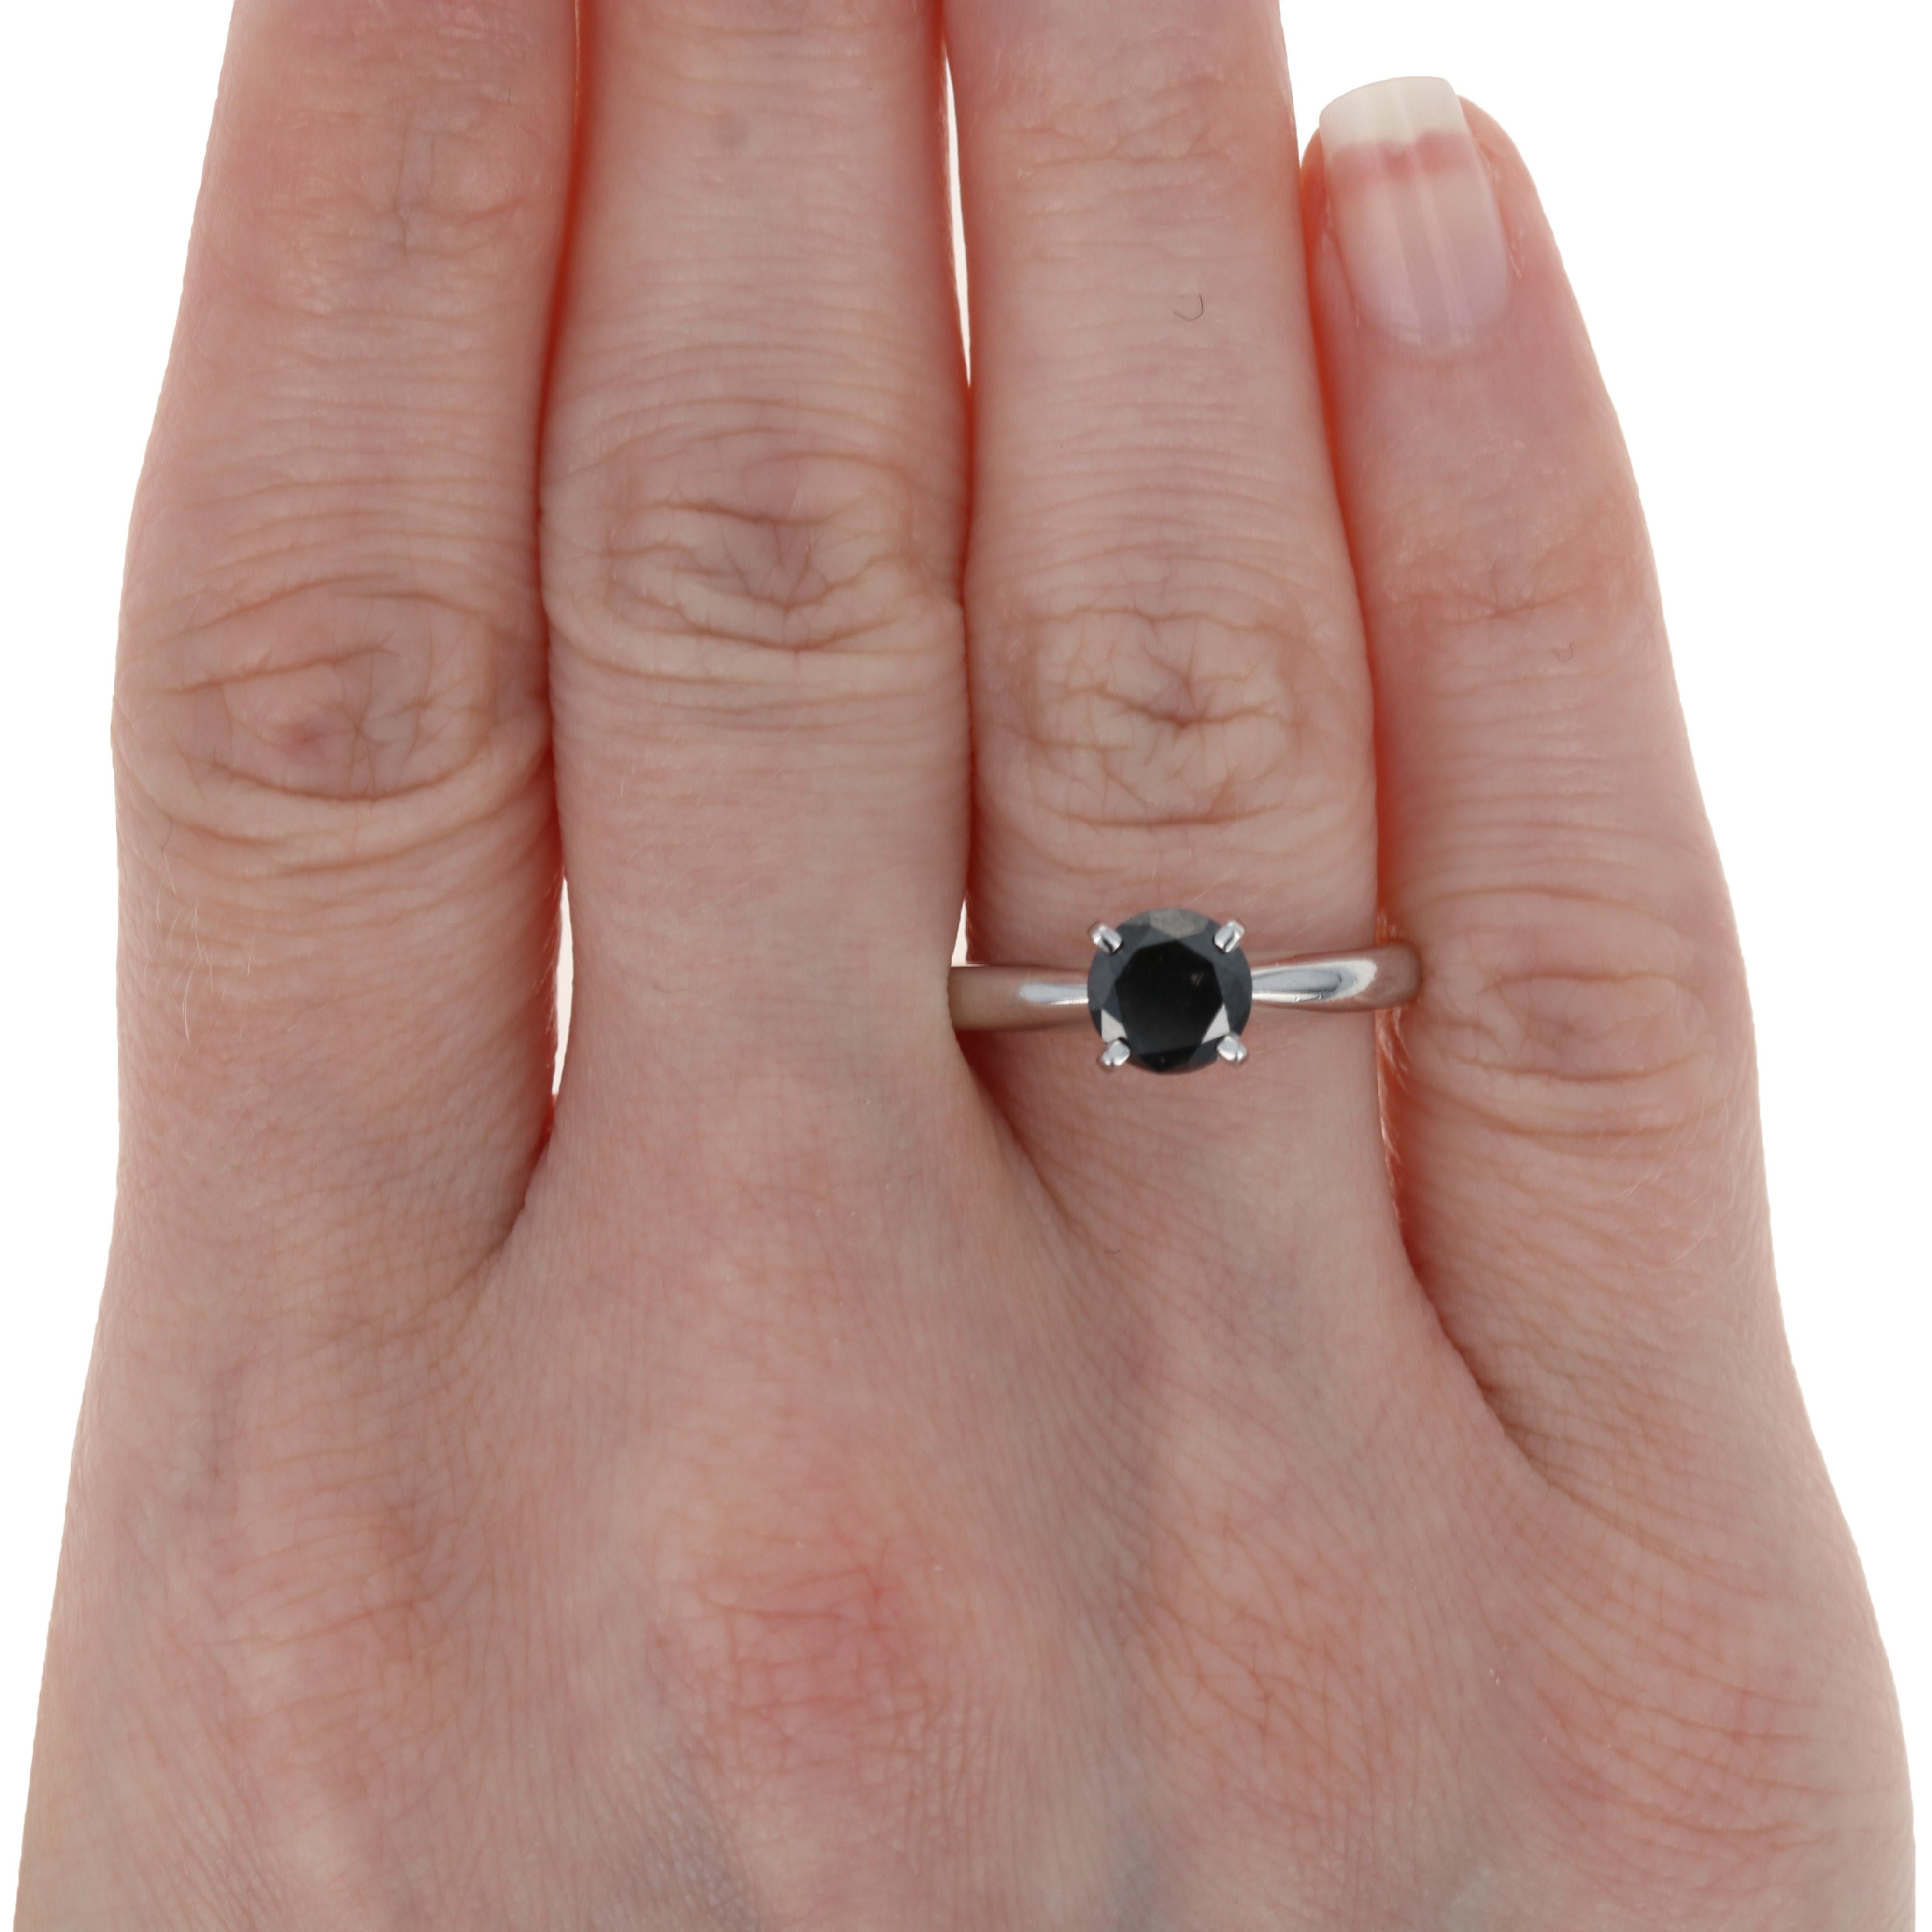 New Black Diamond Solitaire Engagement Ring 1.06ct, 14k White Gold Round Cut 2